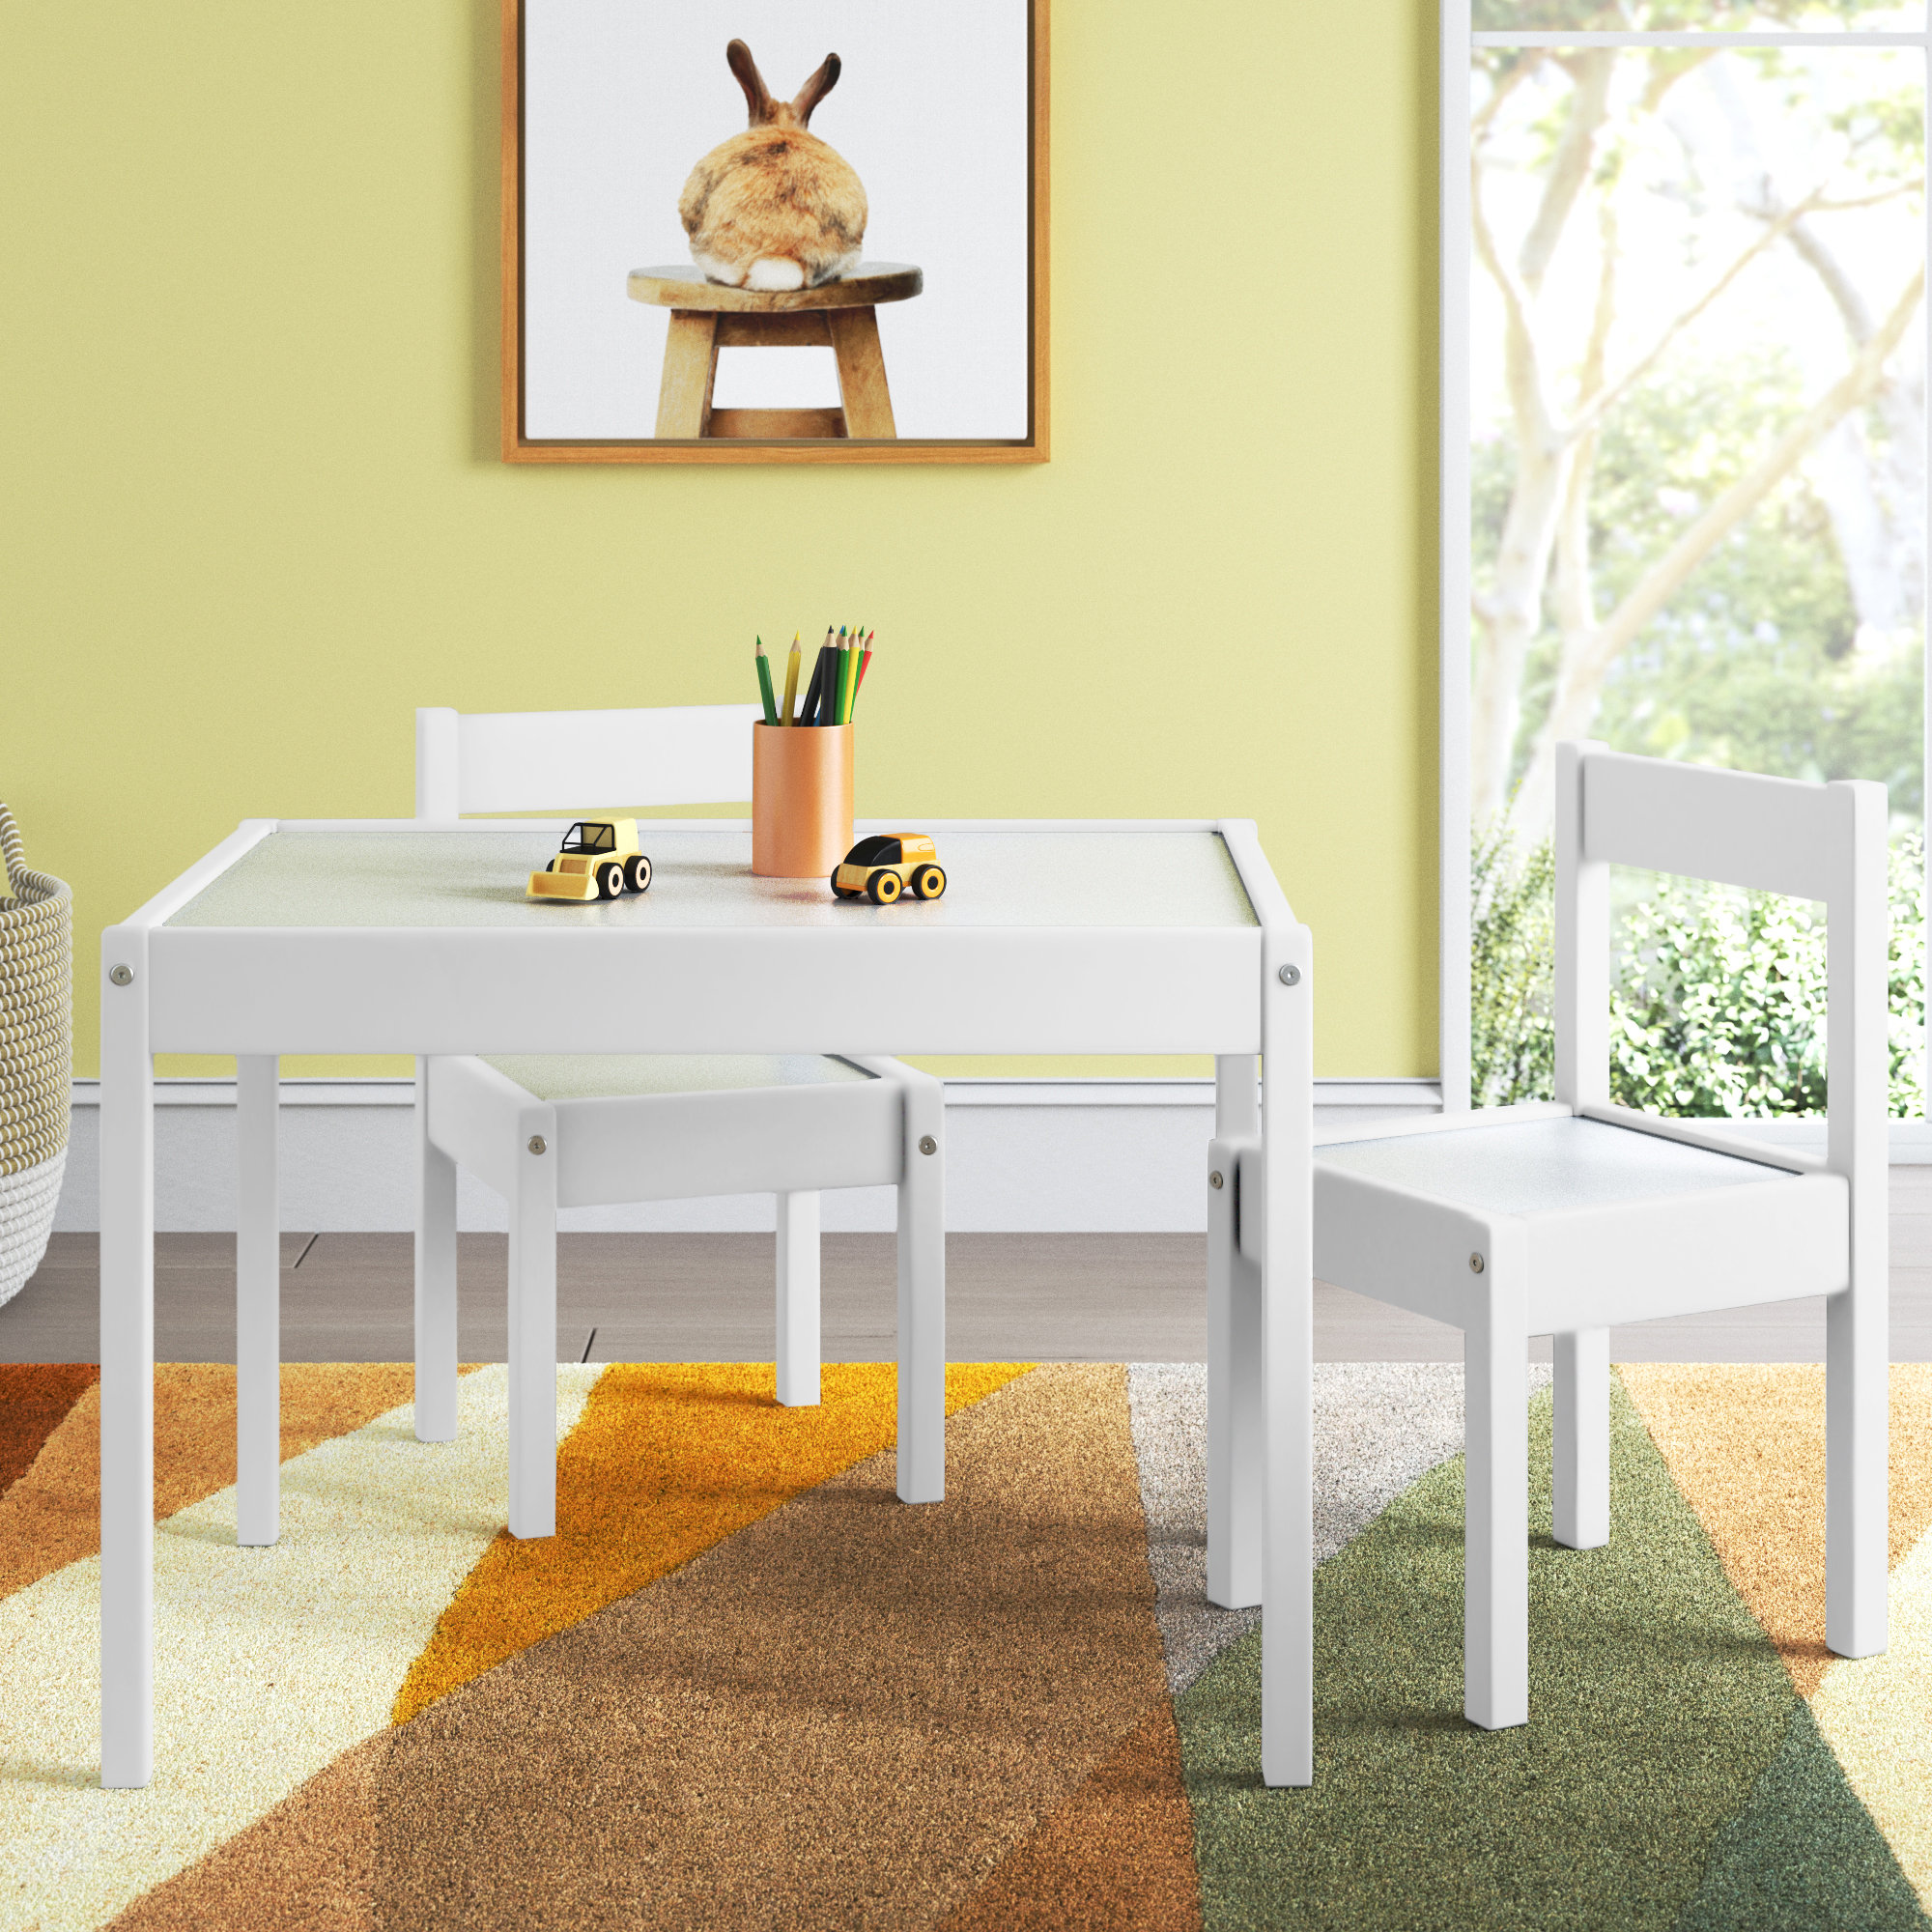 Costzon Kids Table and Chair Set, Kids Mid-Century Modern Style Table Set  for Toddler Children, Kids Dining Table and Chair Set, 5-Piece Set (White